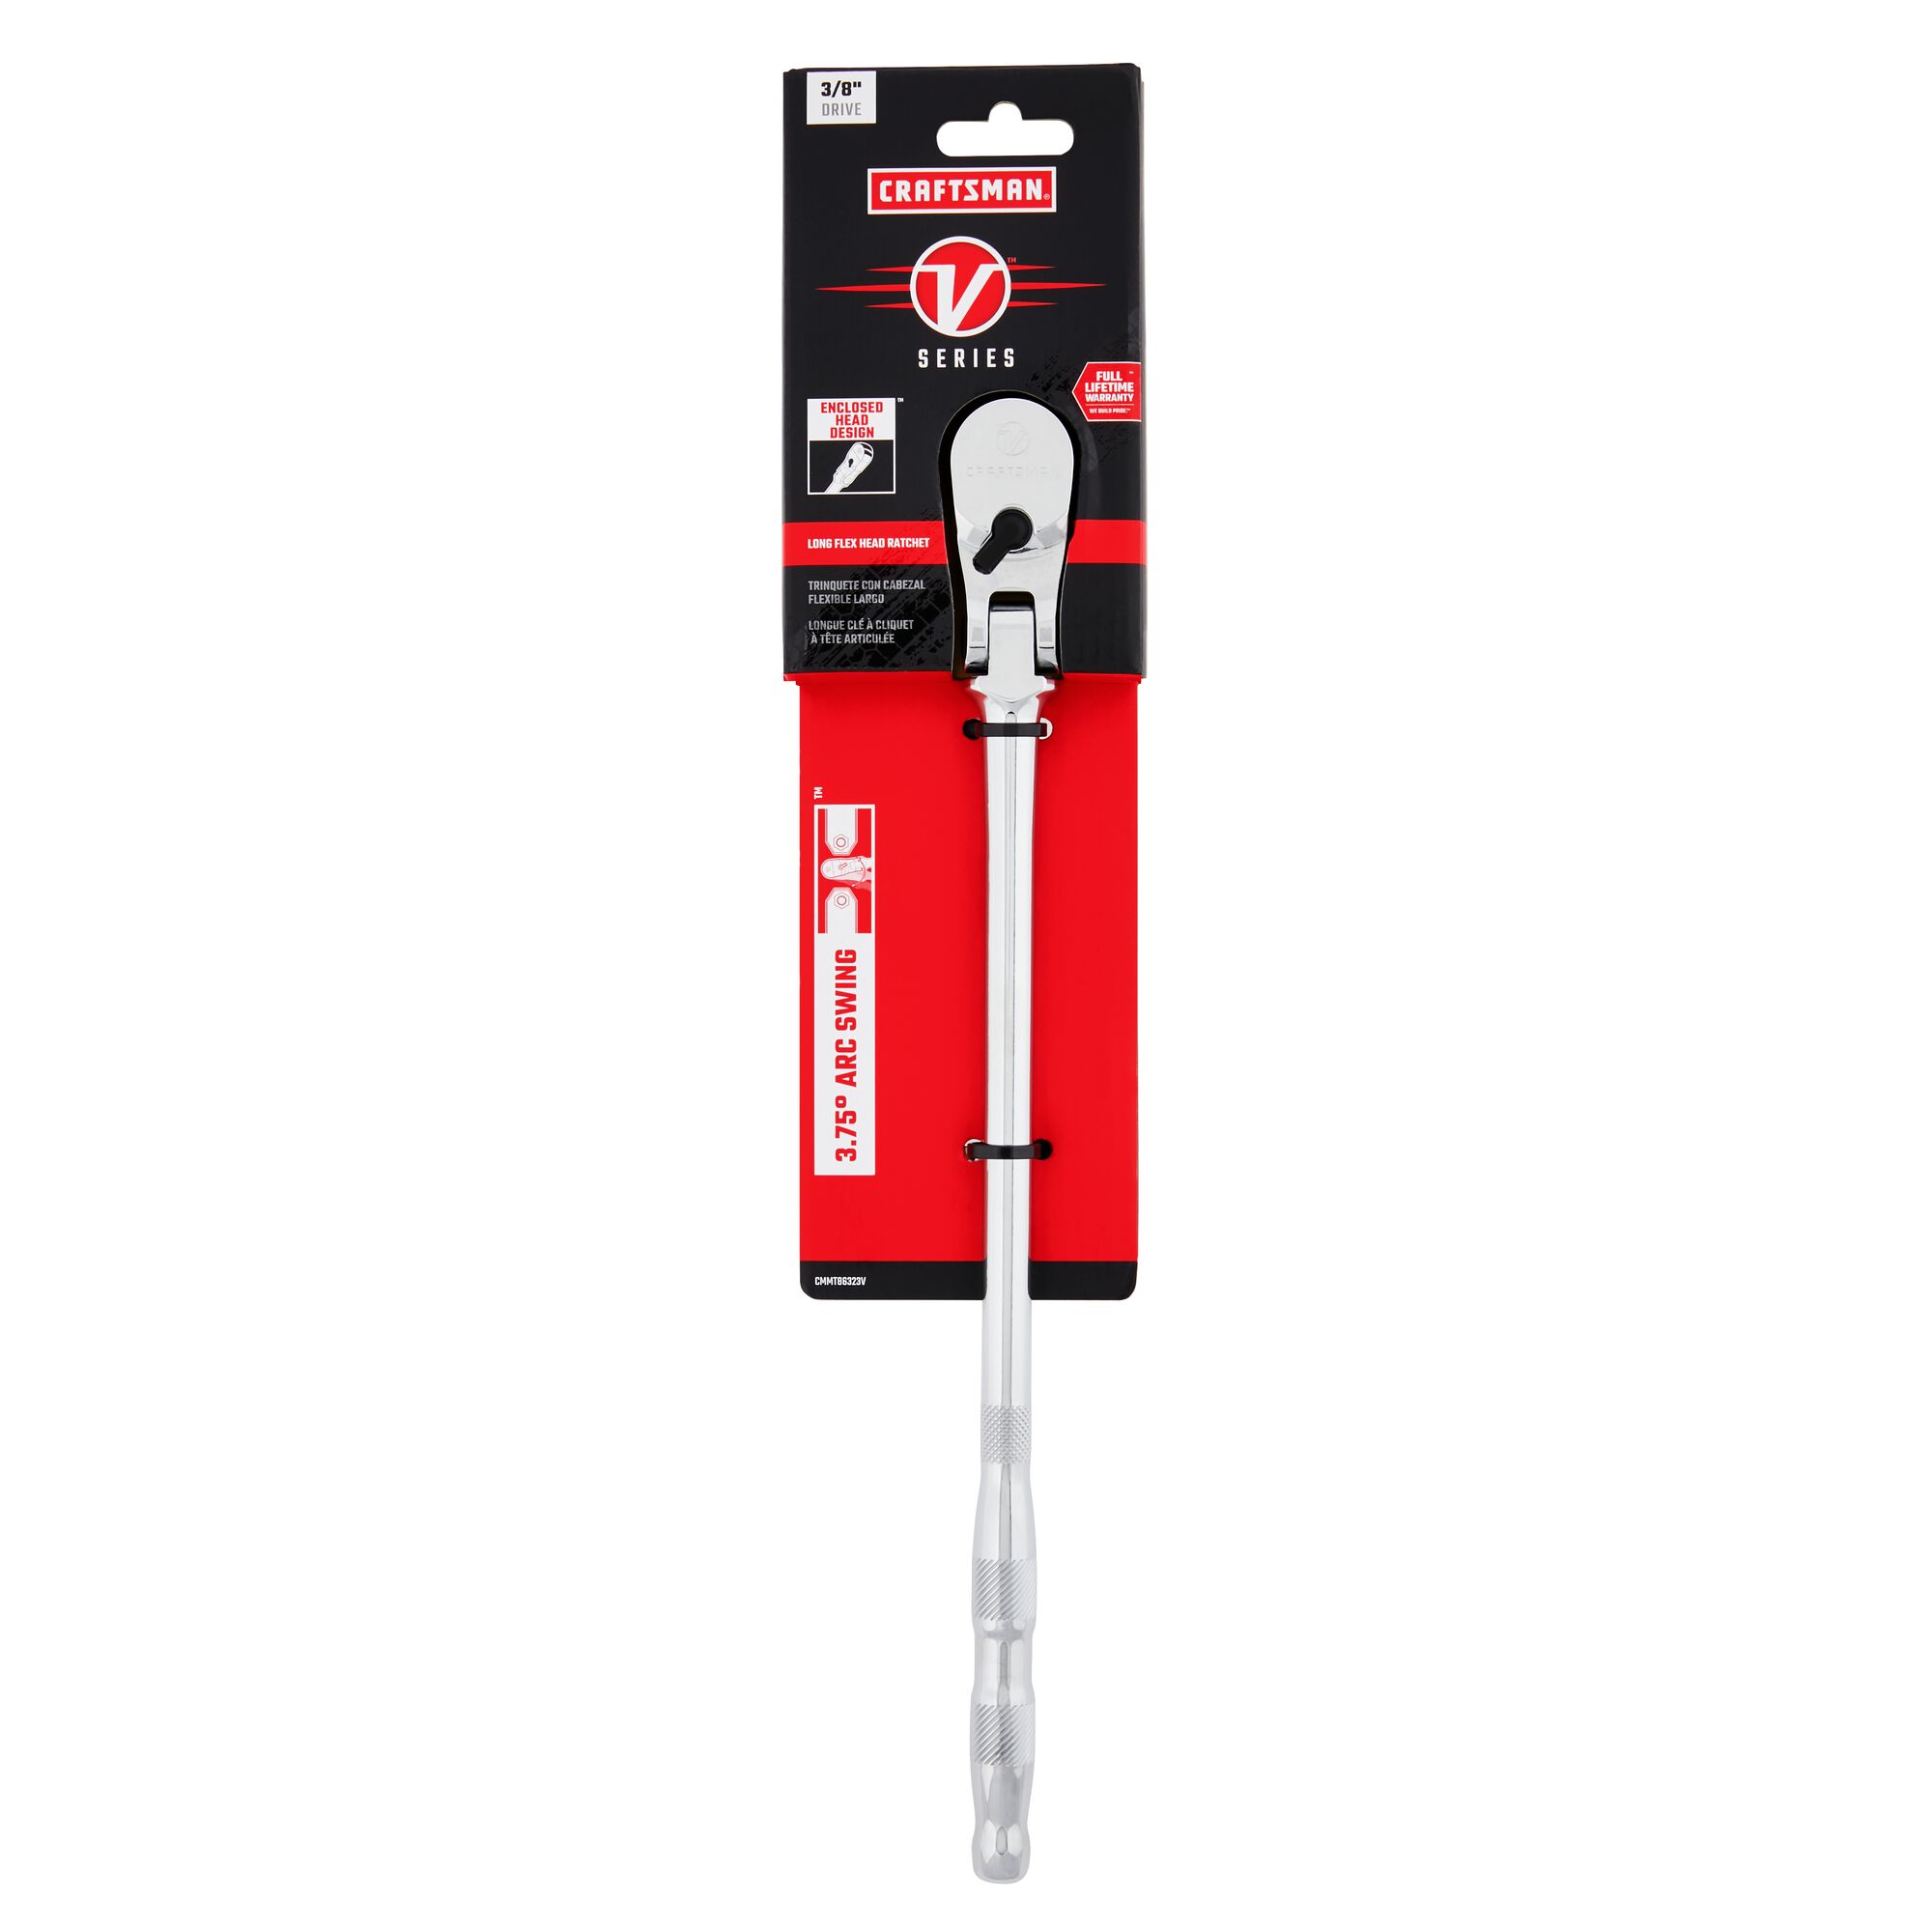 V series three eighth inch drive long flex head ratchet in packaging.